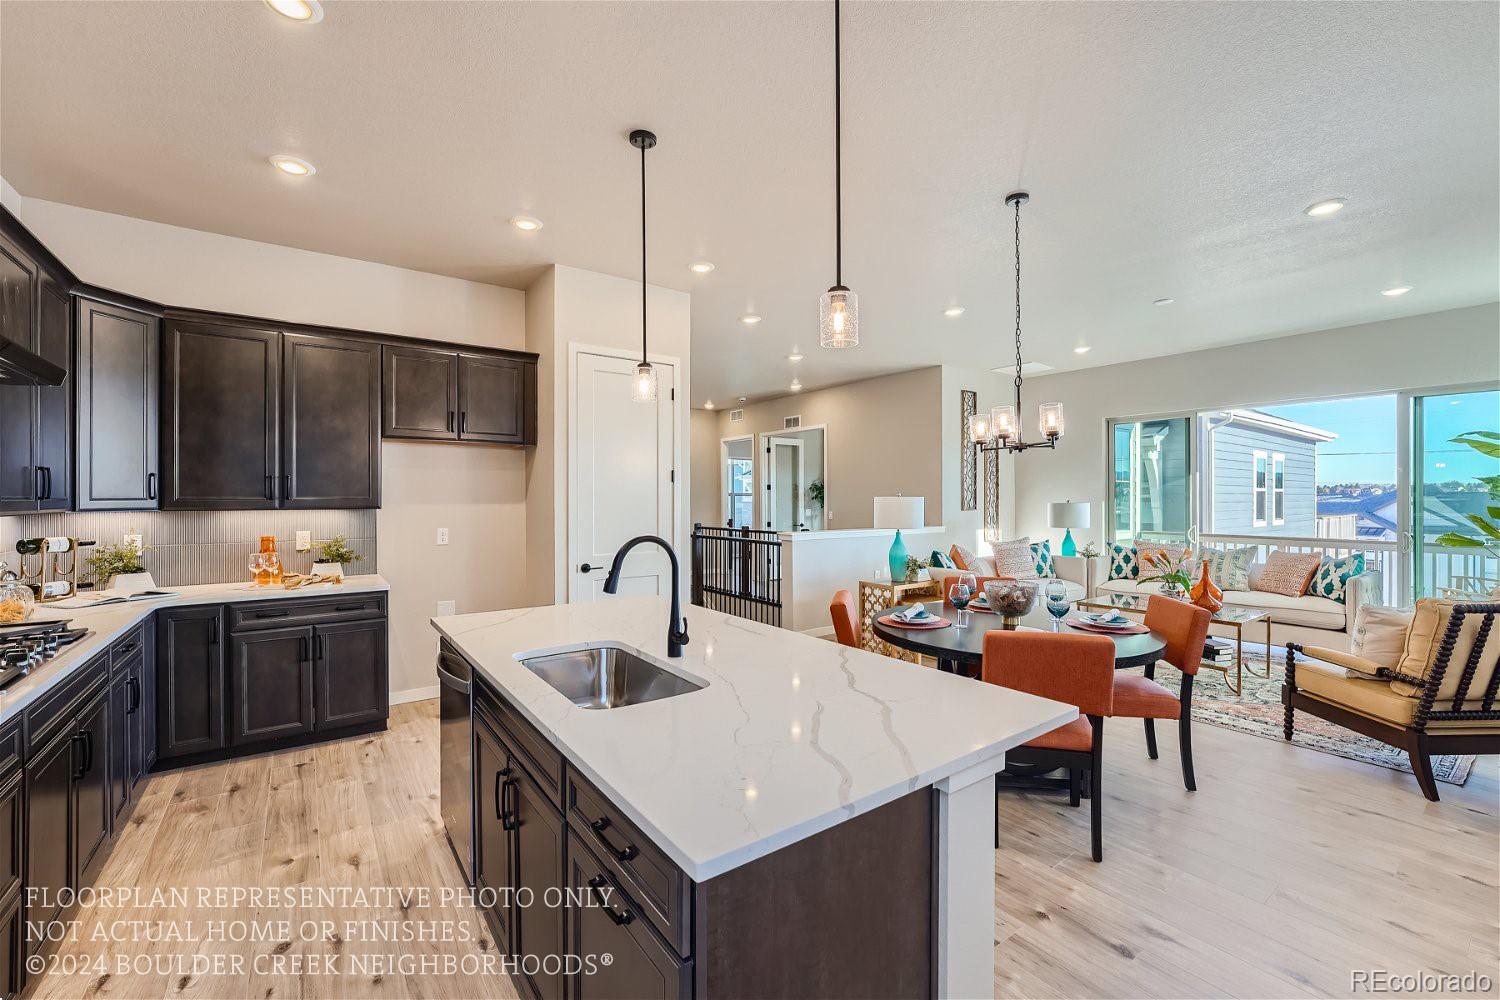 a kitchen with stainless steel appliances kitchen island granite countertop a sink a stove and a wooden floors